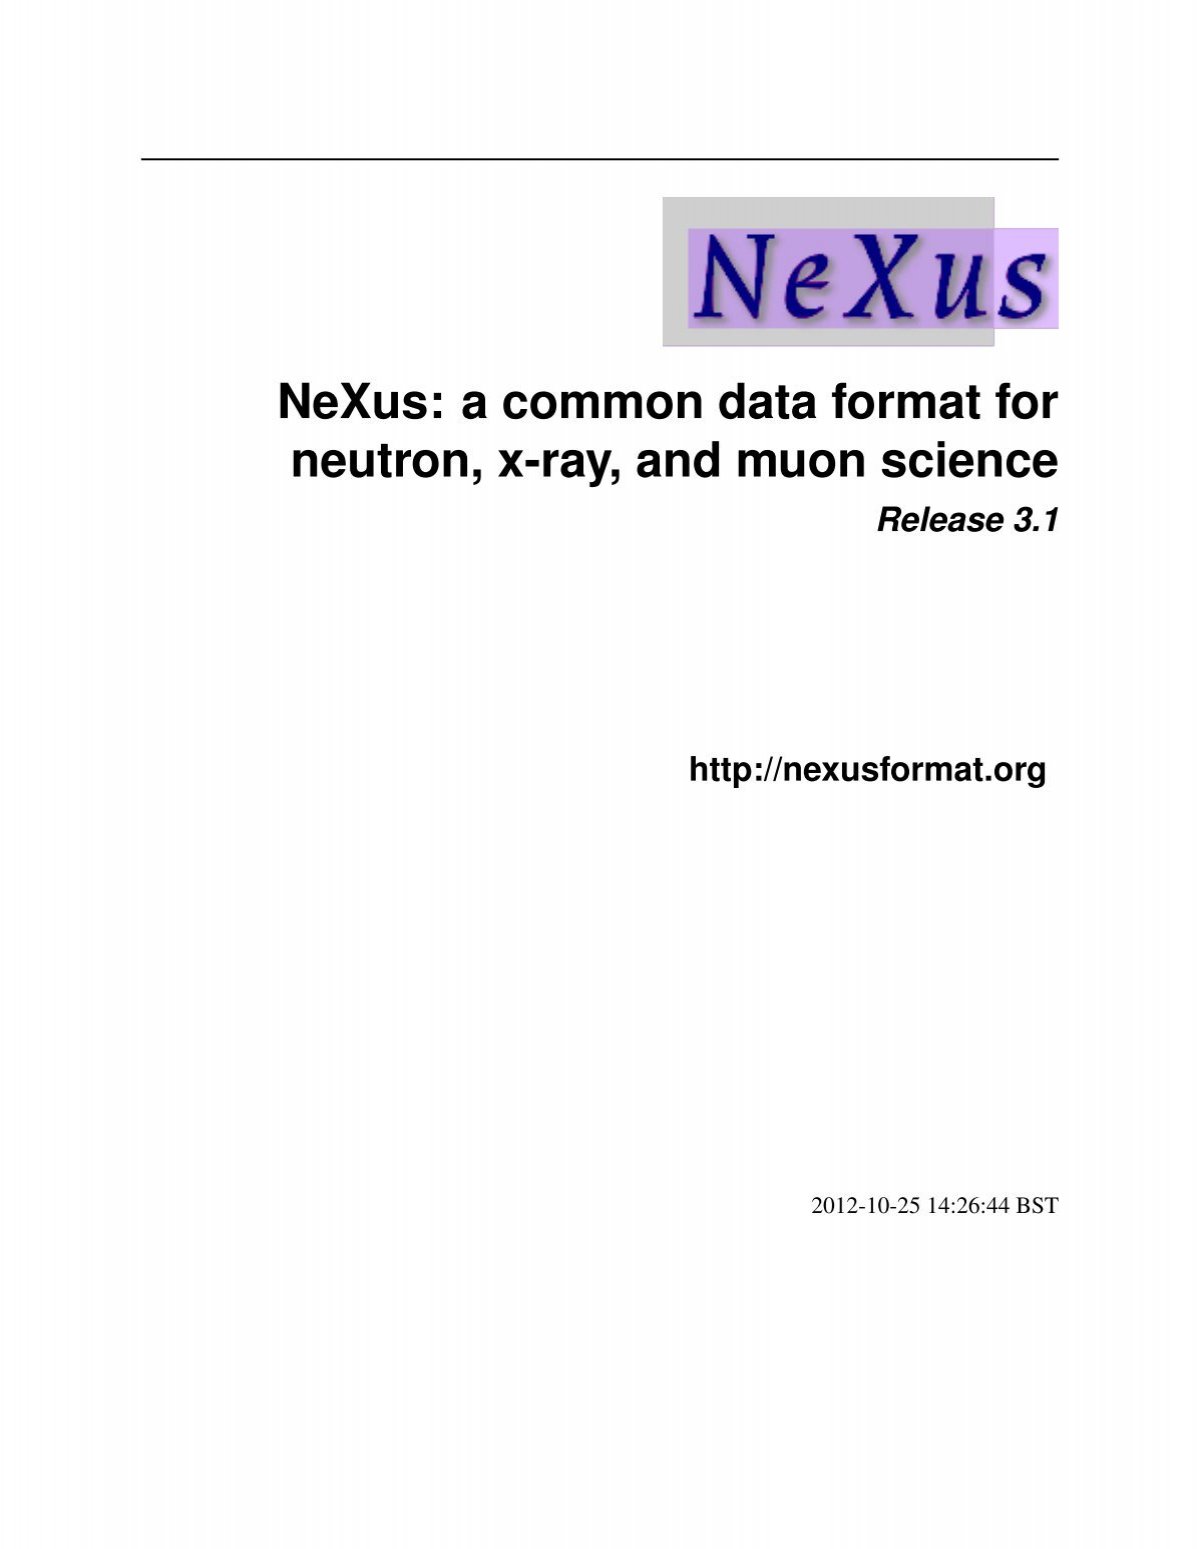 NeXus file structure showing the NXtomo subentry expanded to show